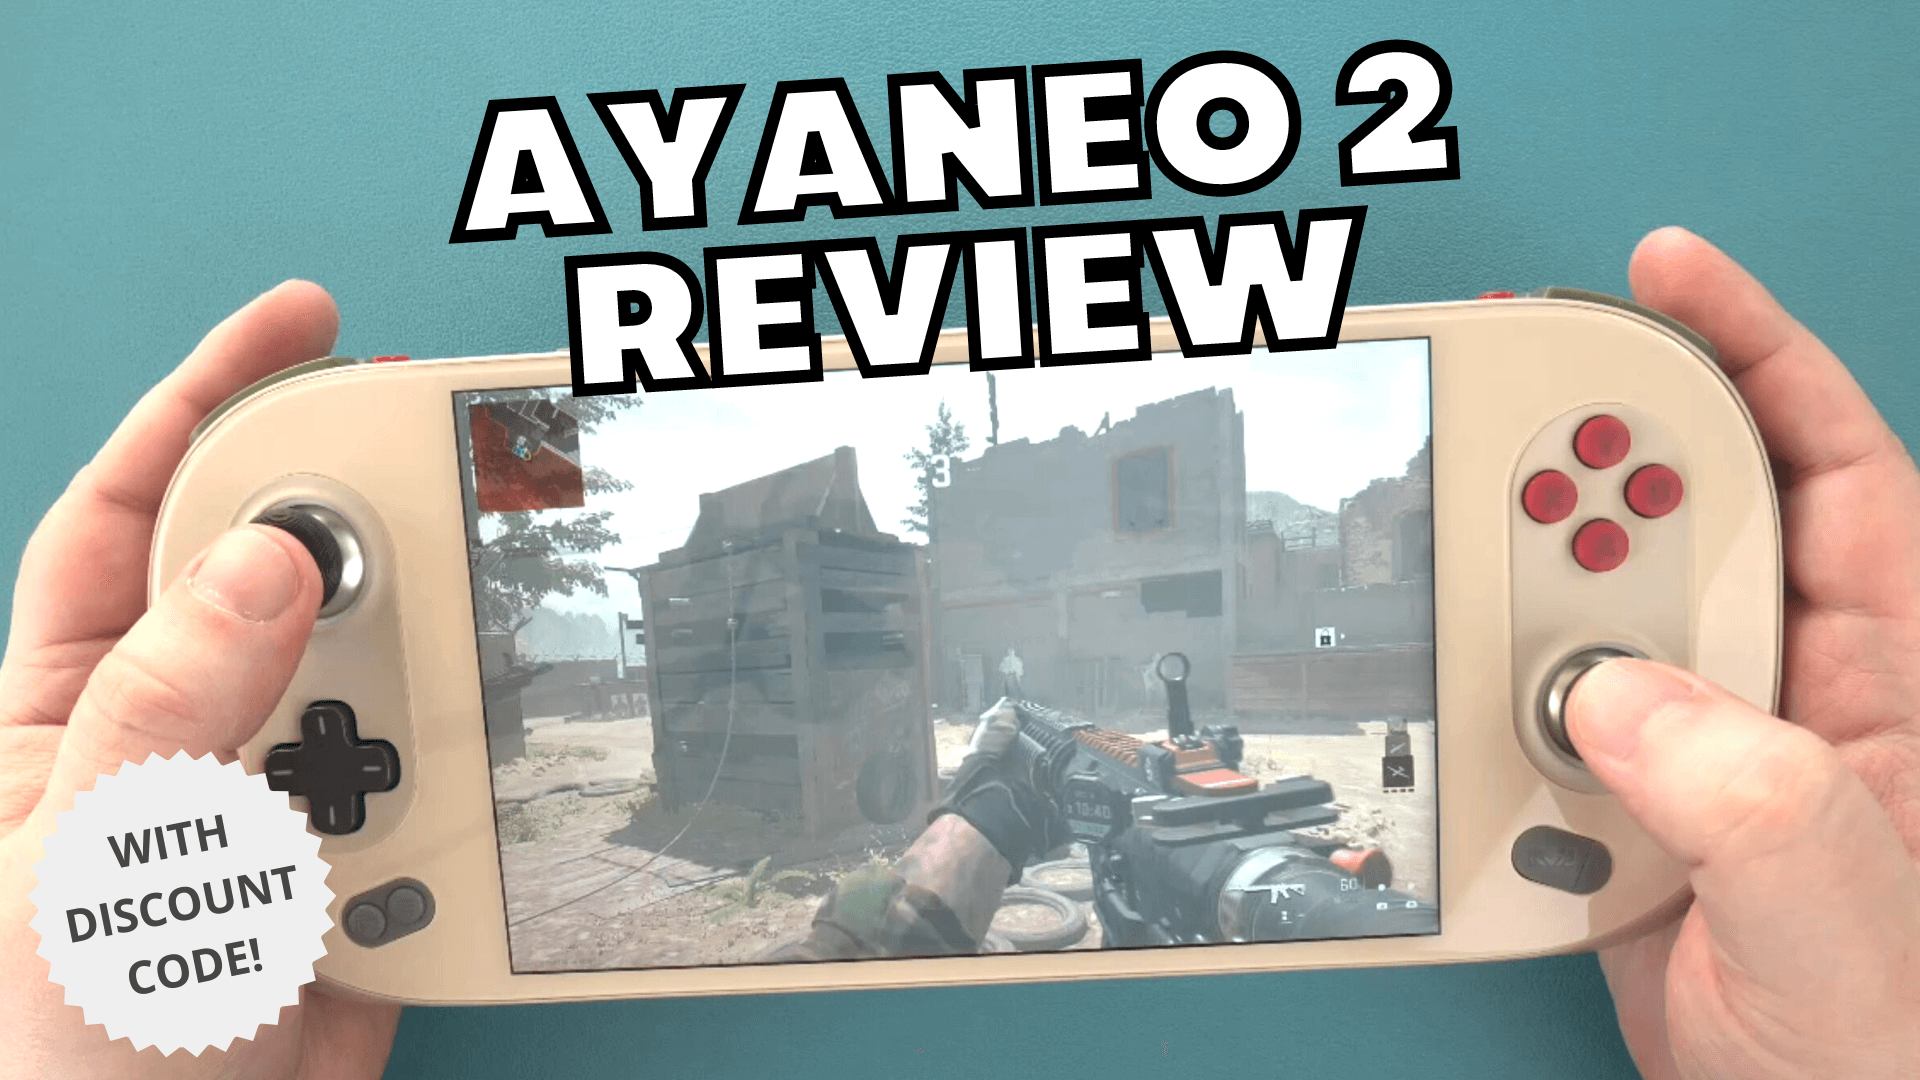 AYANEO 2 Review – AAA gaming handheld PC!